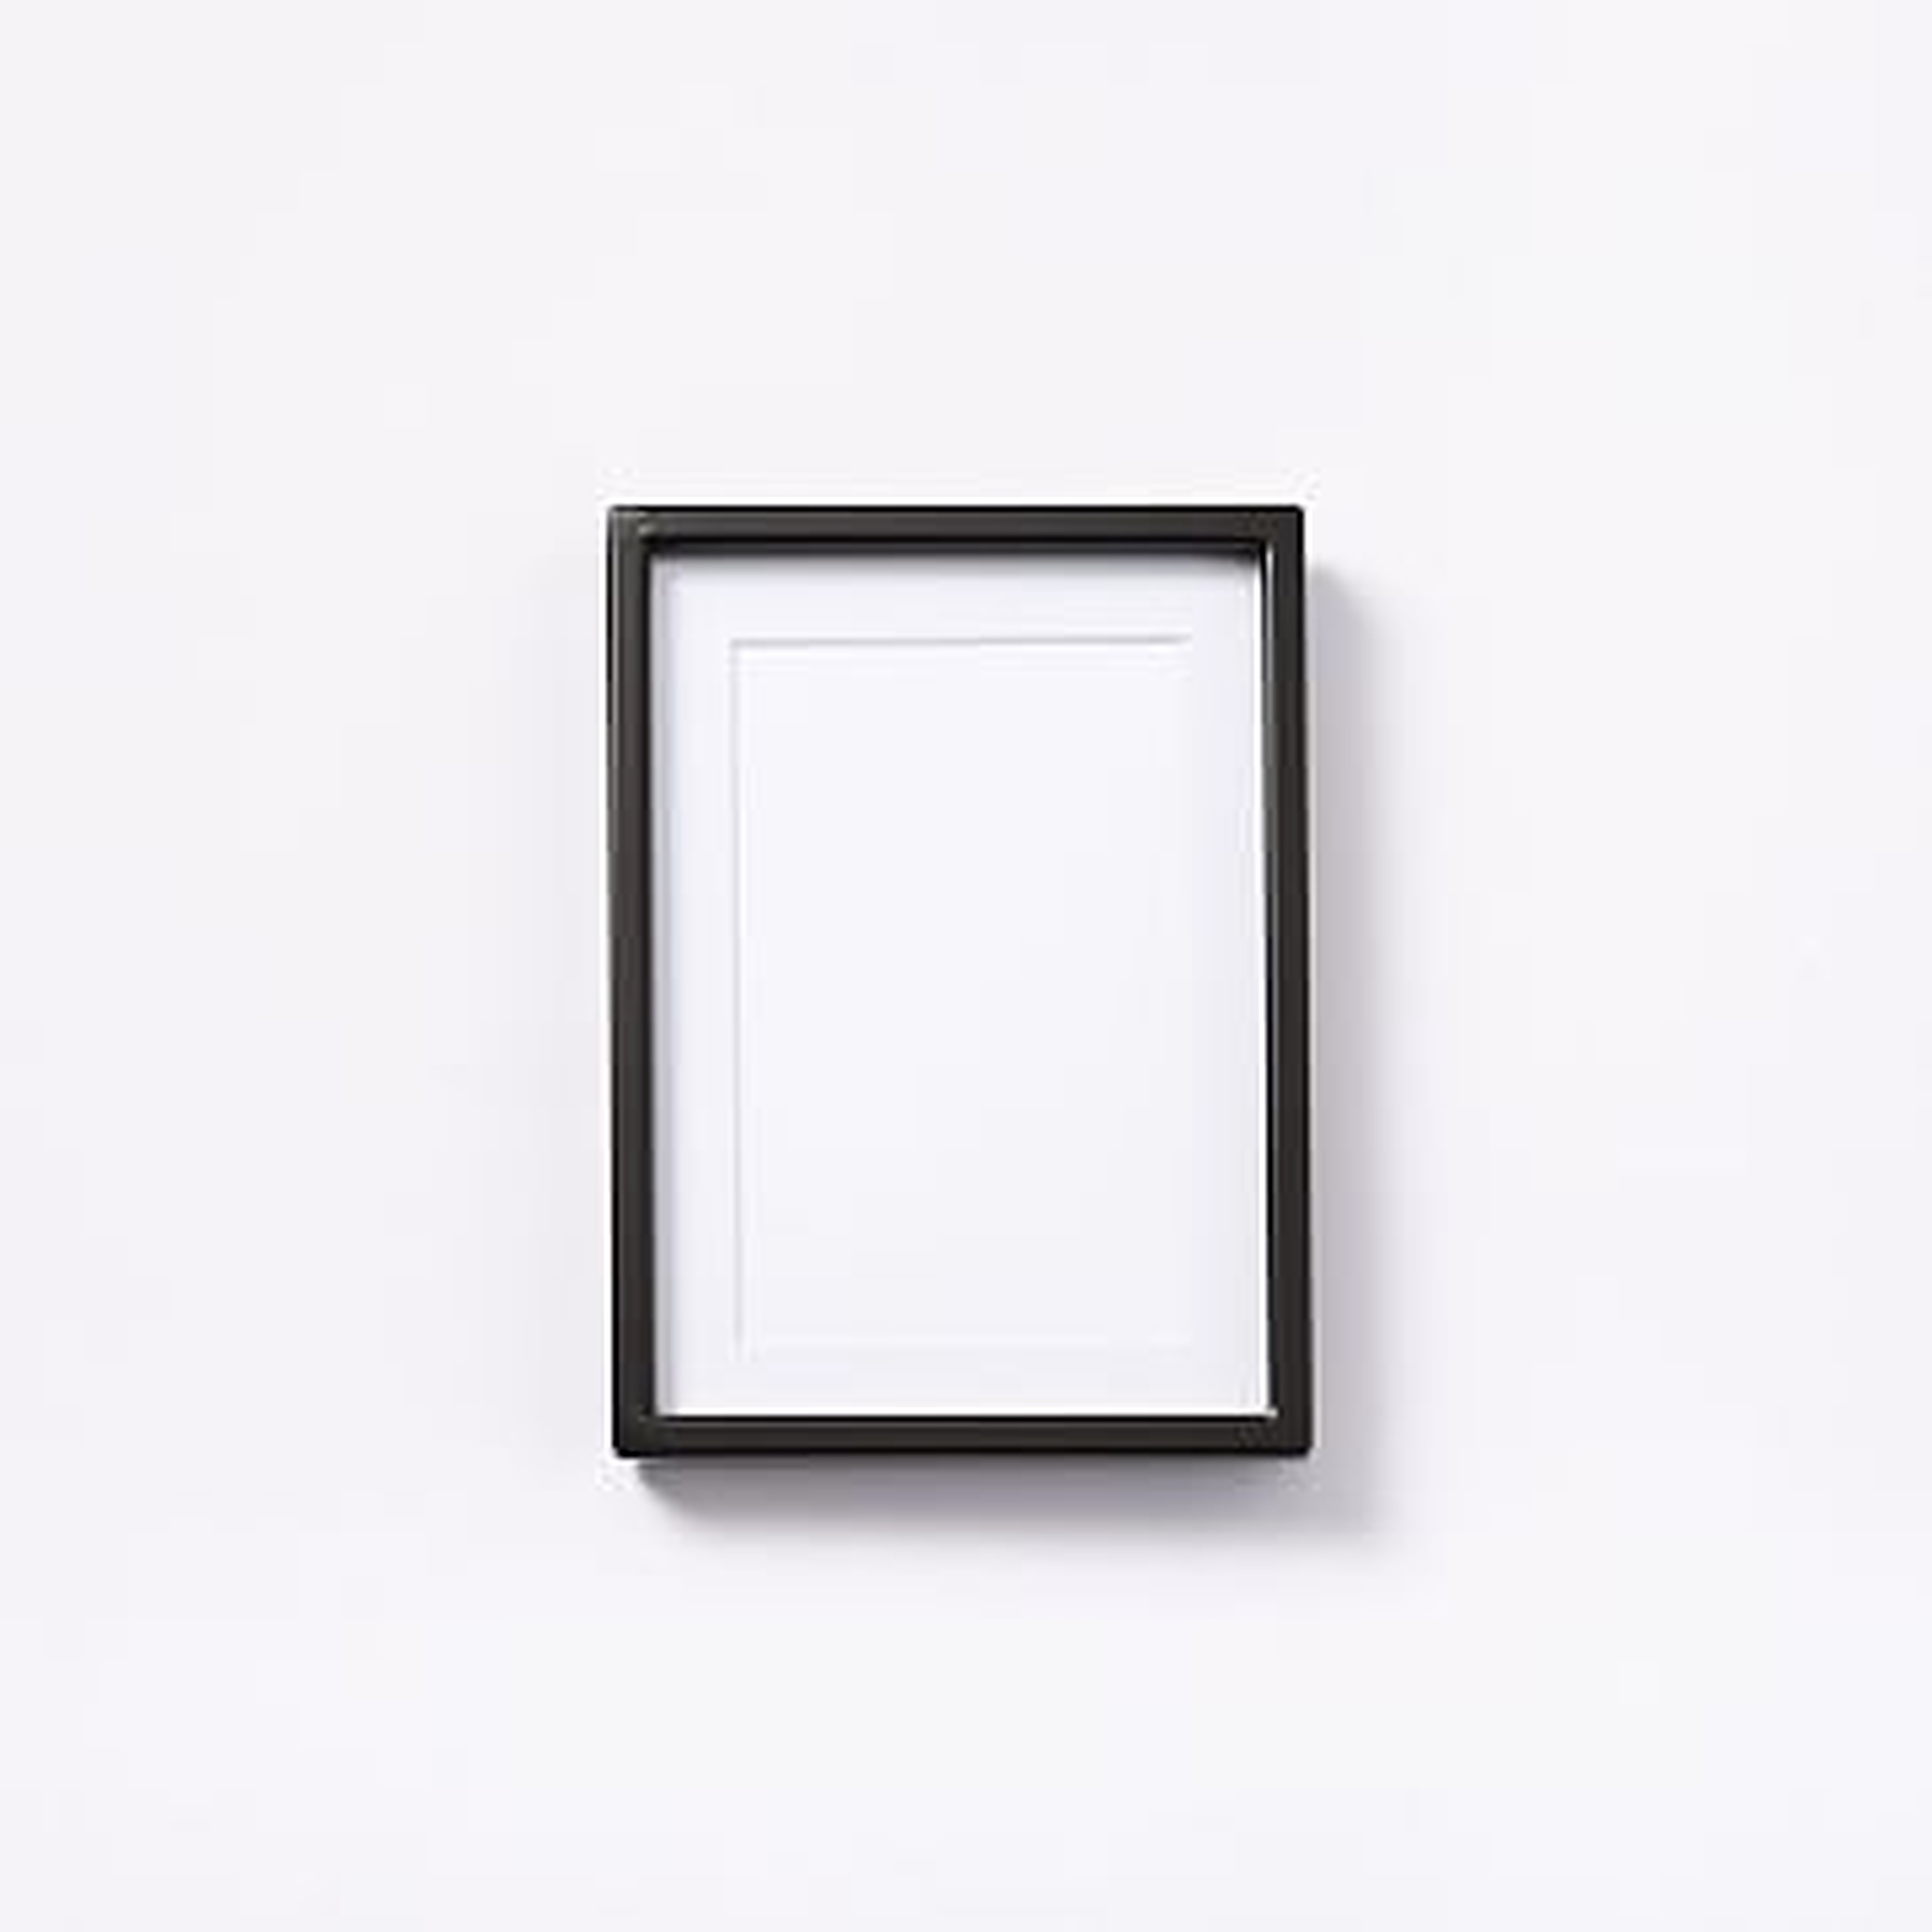 Gallery Frame, Antique Bronze, 4" x 6" (5" x 7" without mat) - West Elm